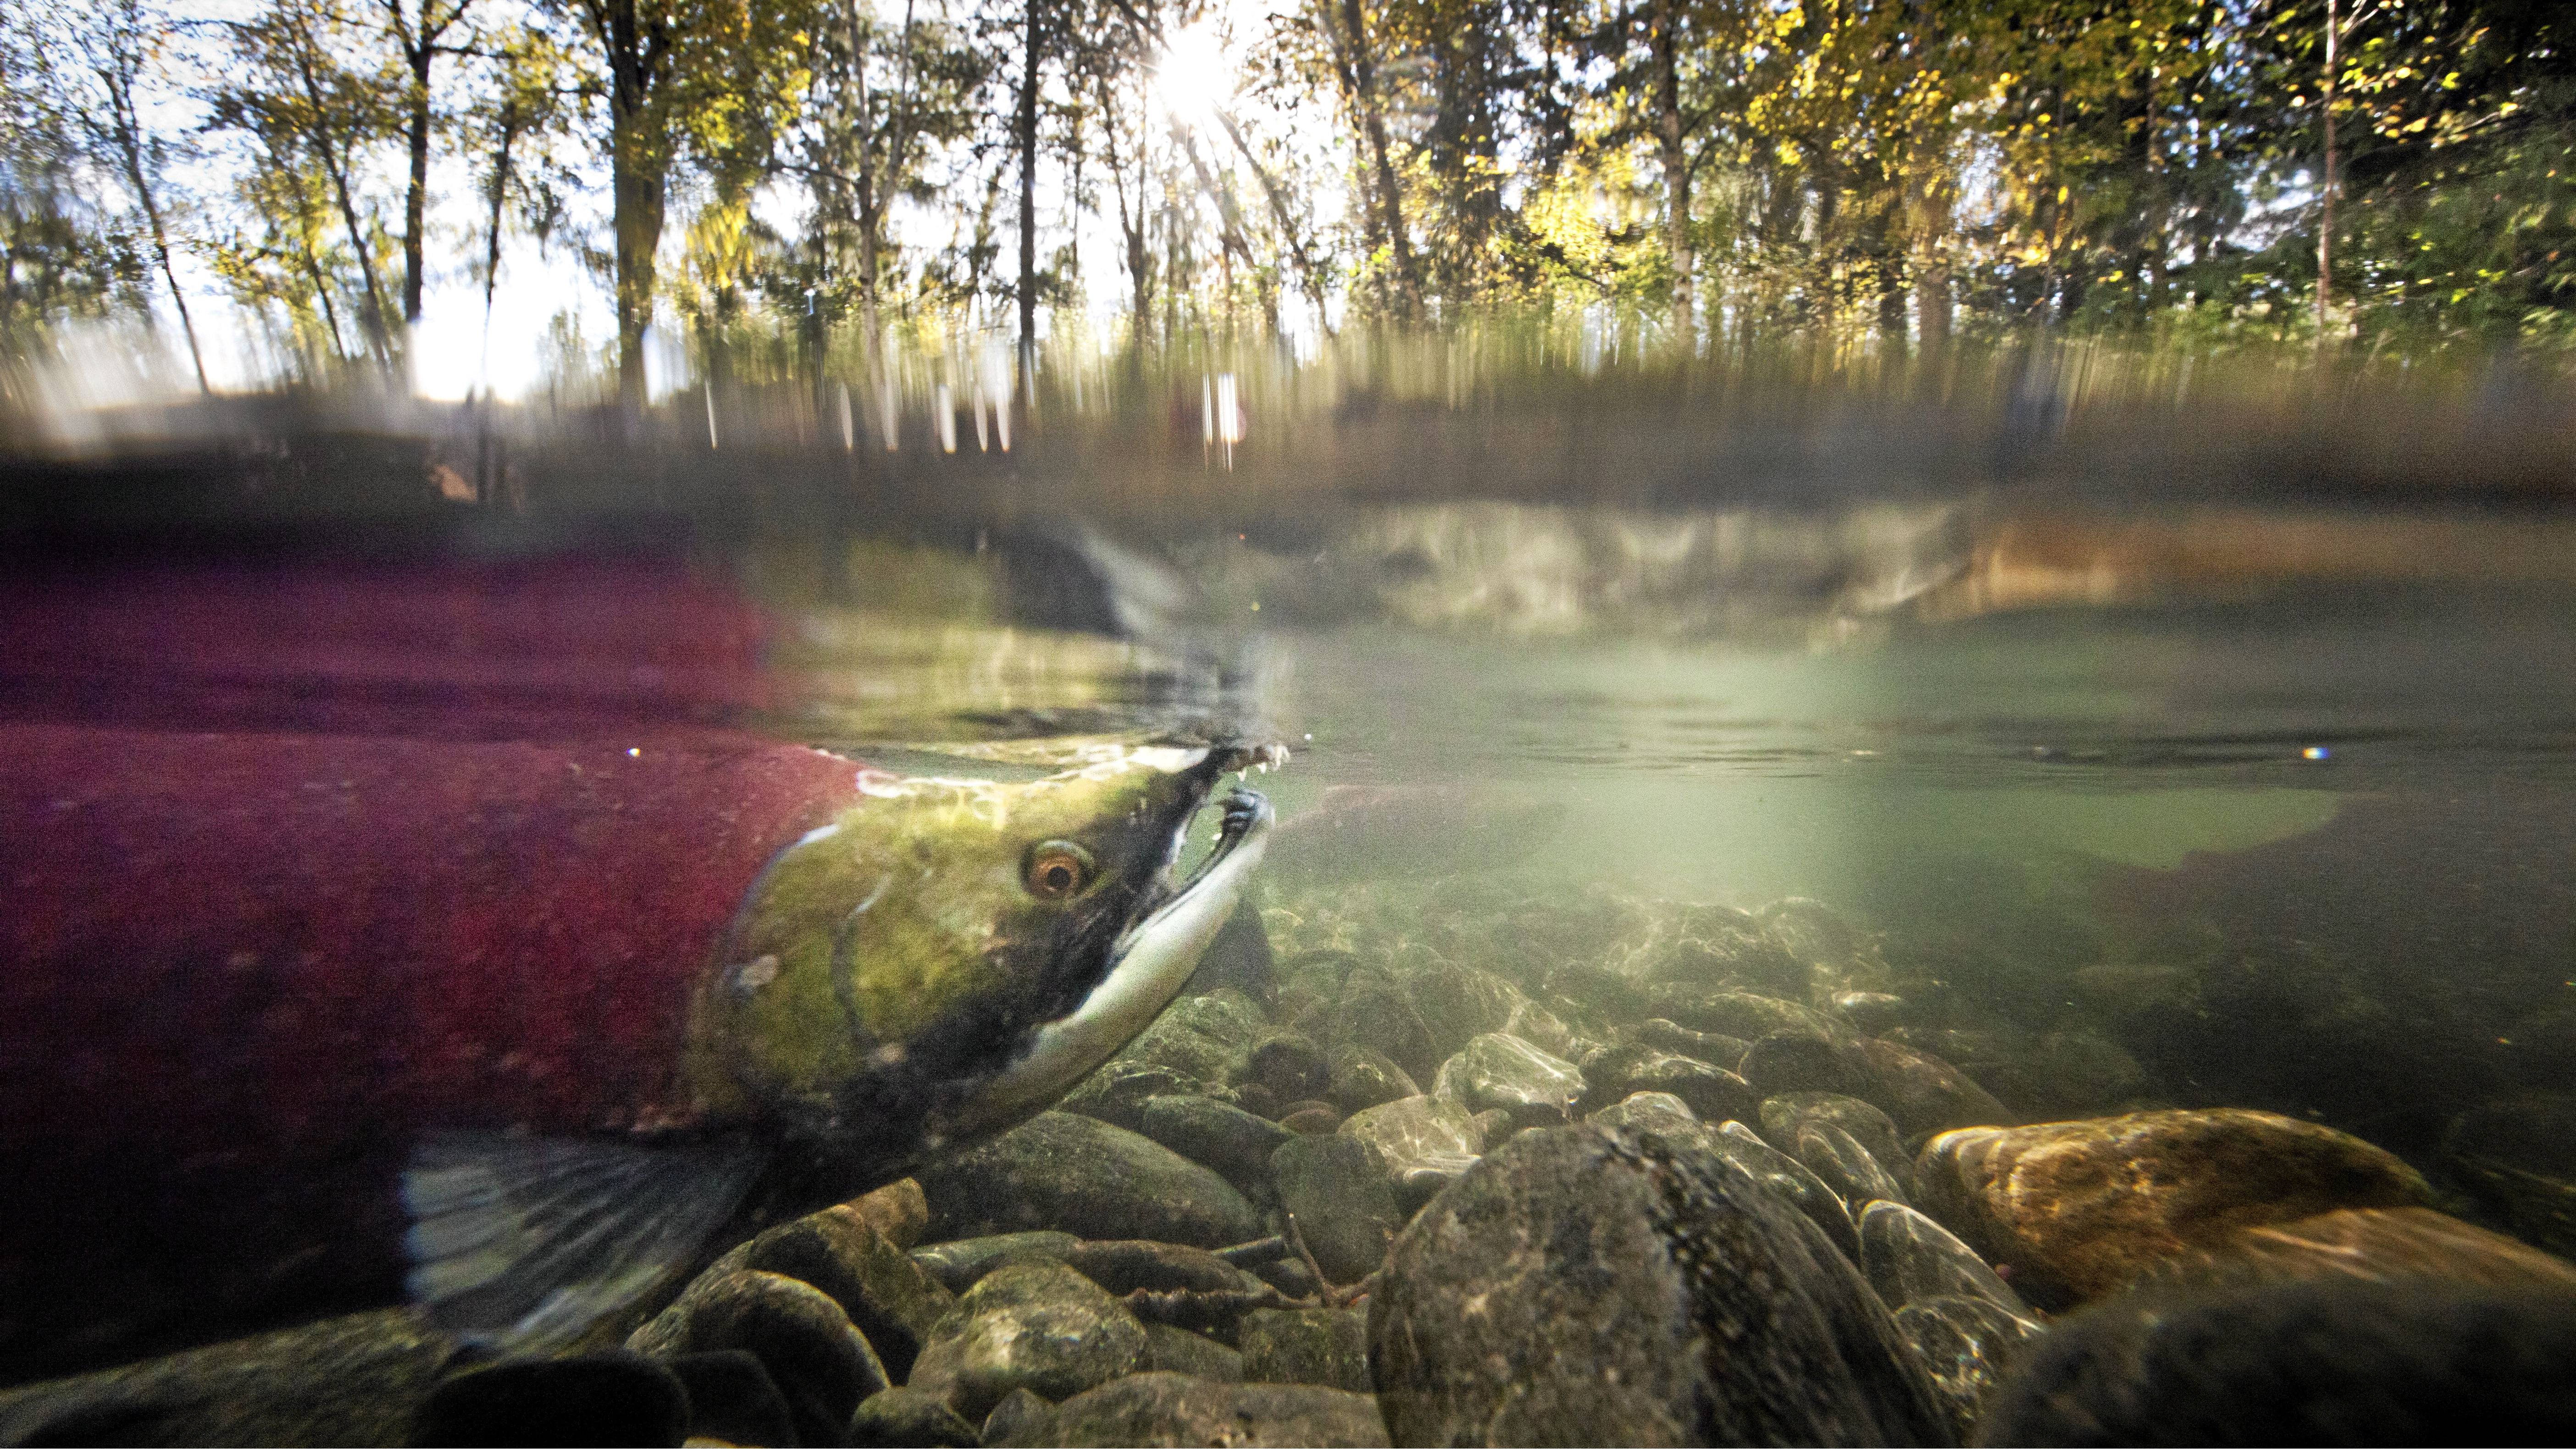 Health of salmon run affects ecosystem of forest - The Globe and Mail